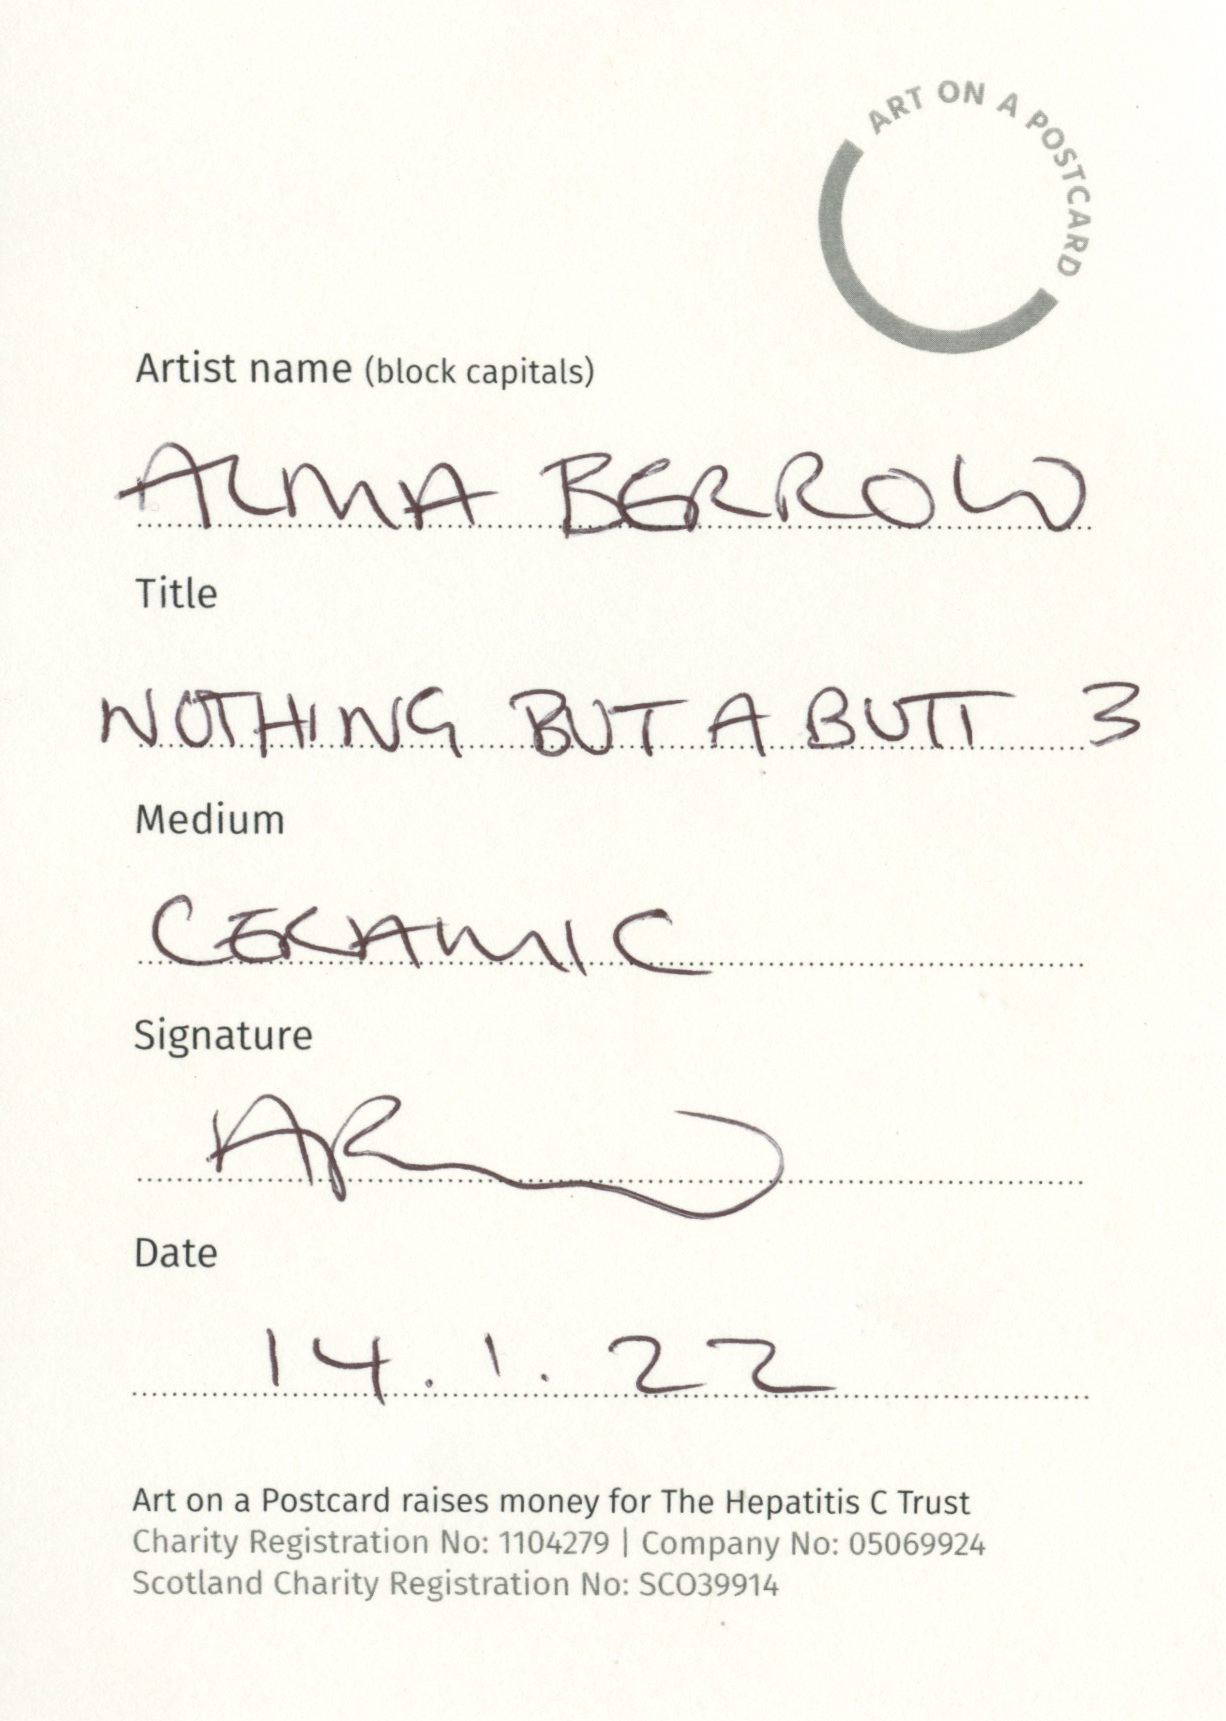 25. Alma Berrow - Nothing But a Butt 3 - BACK1